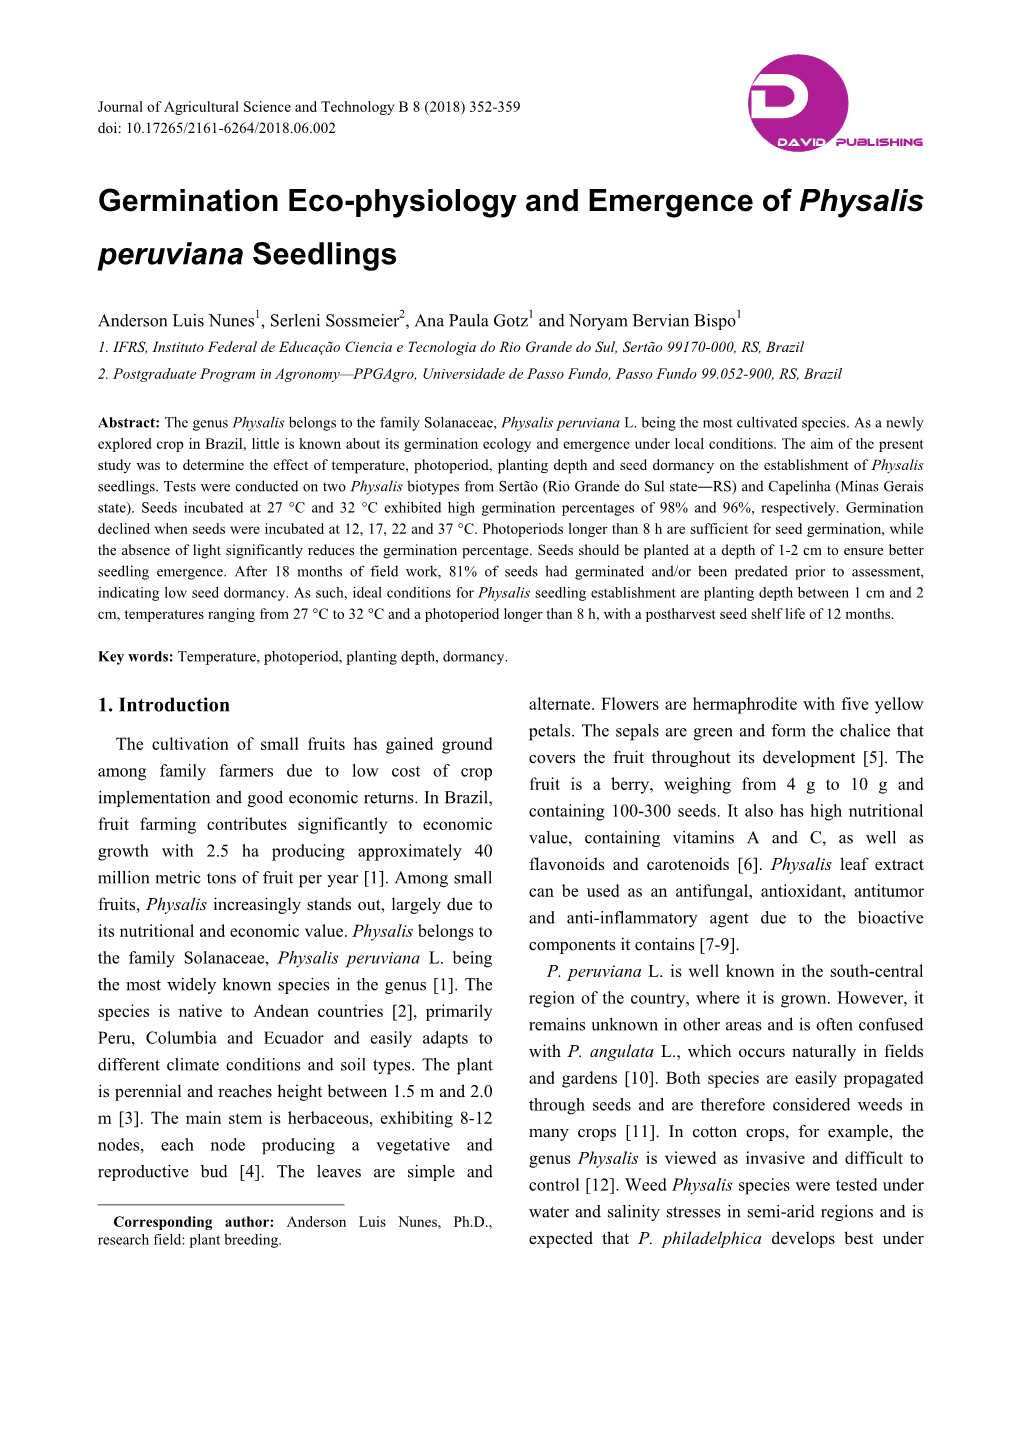 Germination Eco-Physiology and Emergence of Physalis Peruviana Seedlings